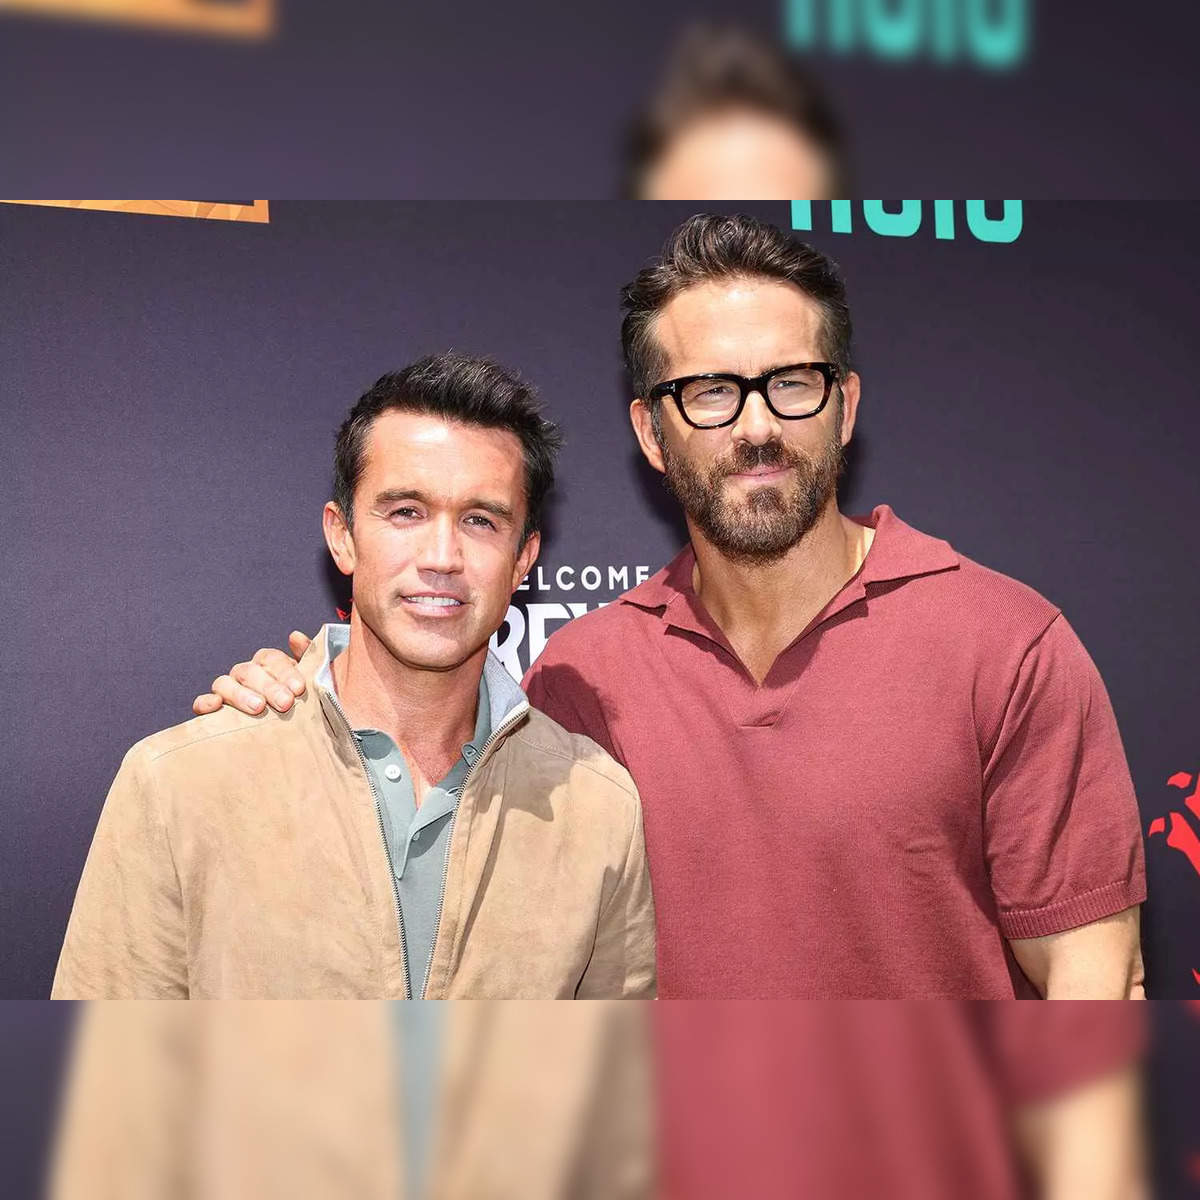 Ryan Reynolds news & latest pictures from